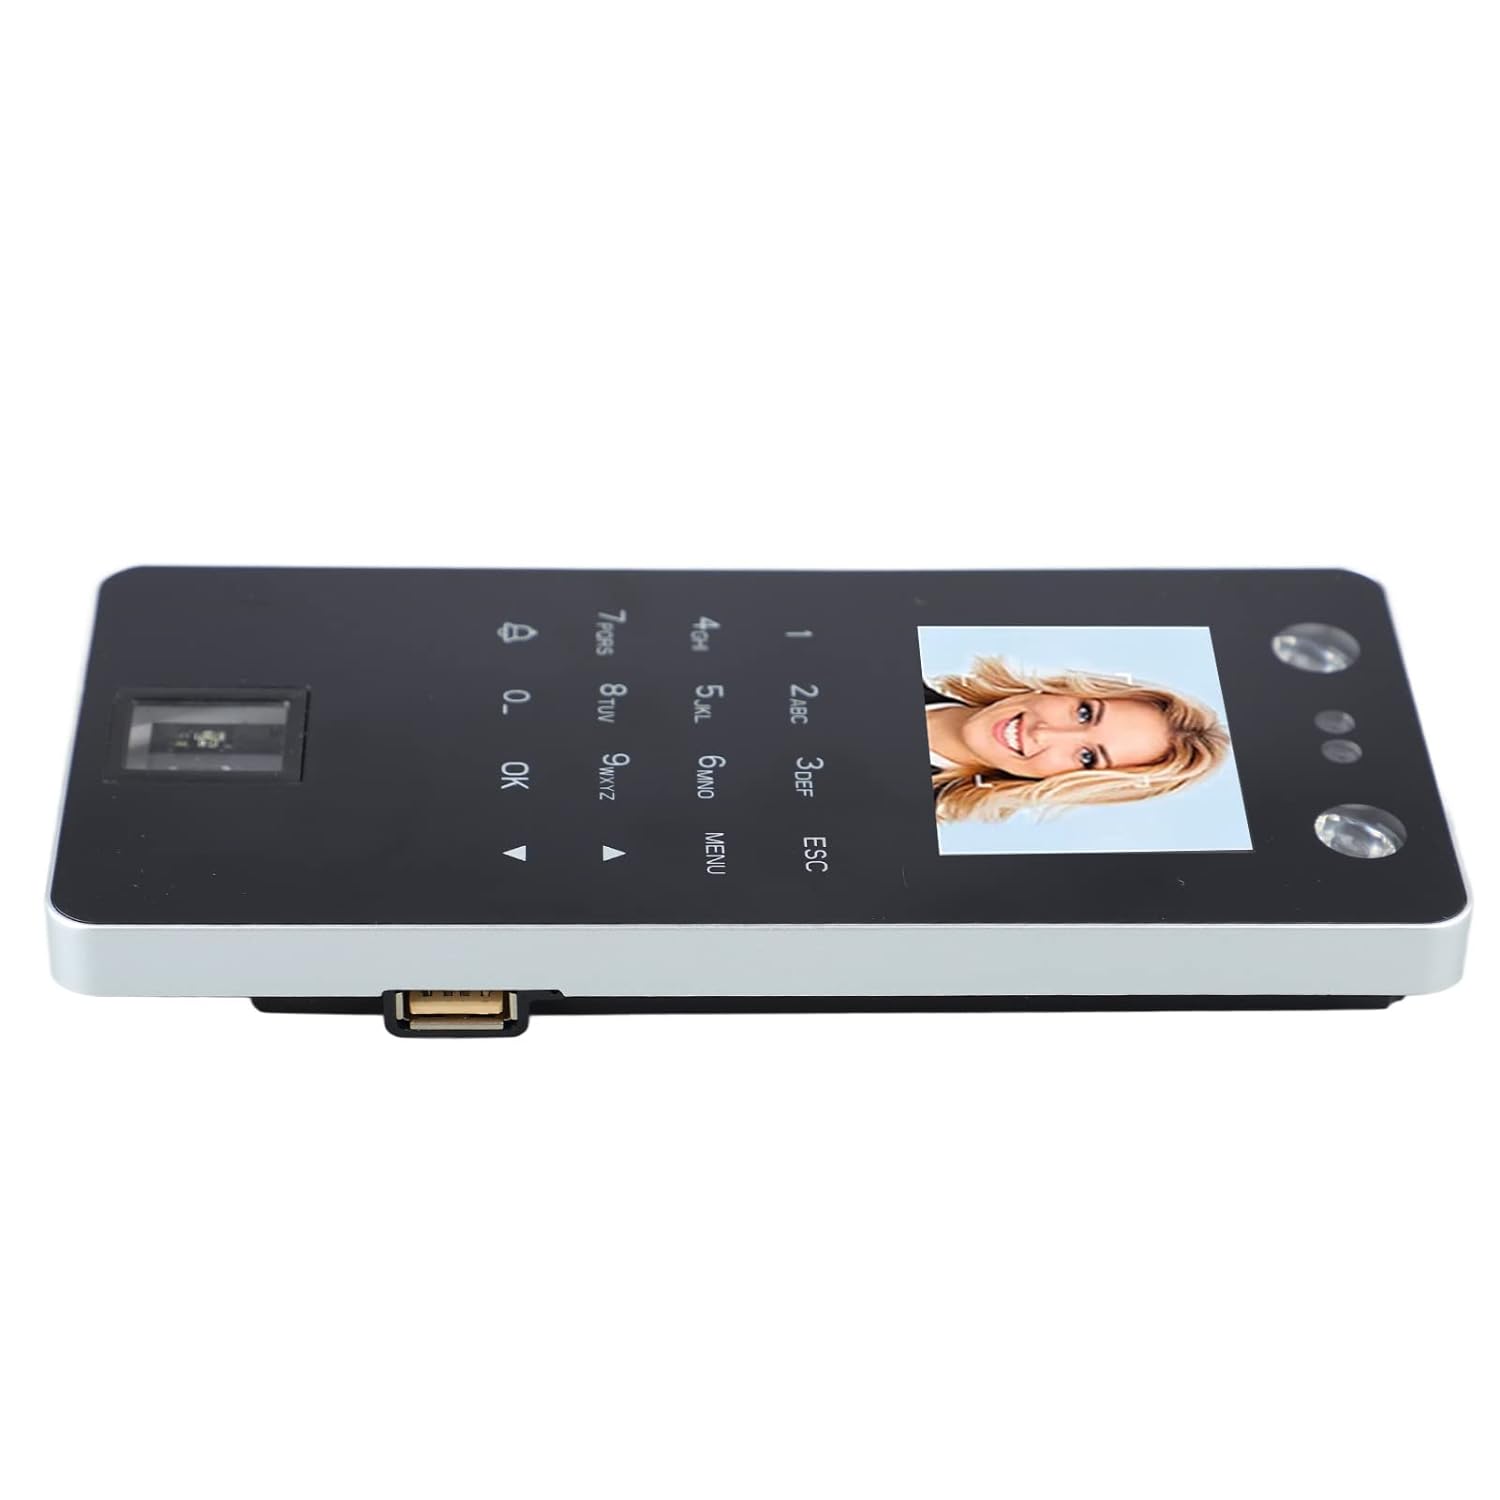 2.4In Access Control Time Attendance Machine, Biometric Employee Time Attandence Machine for Small Business and Office